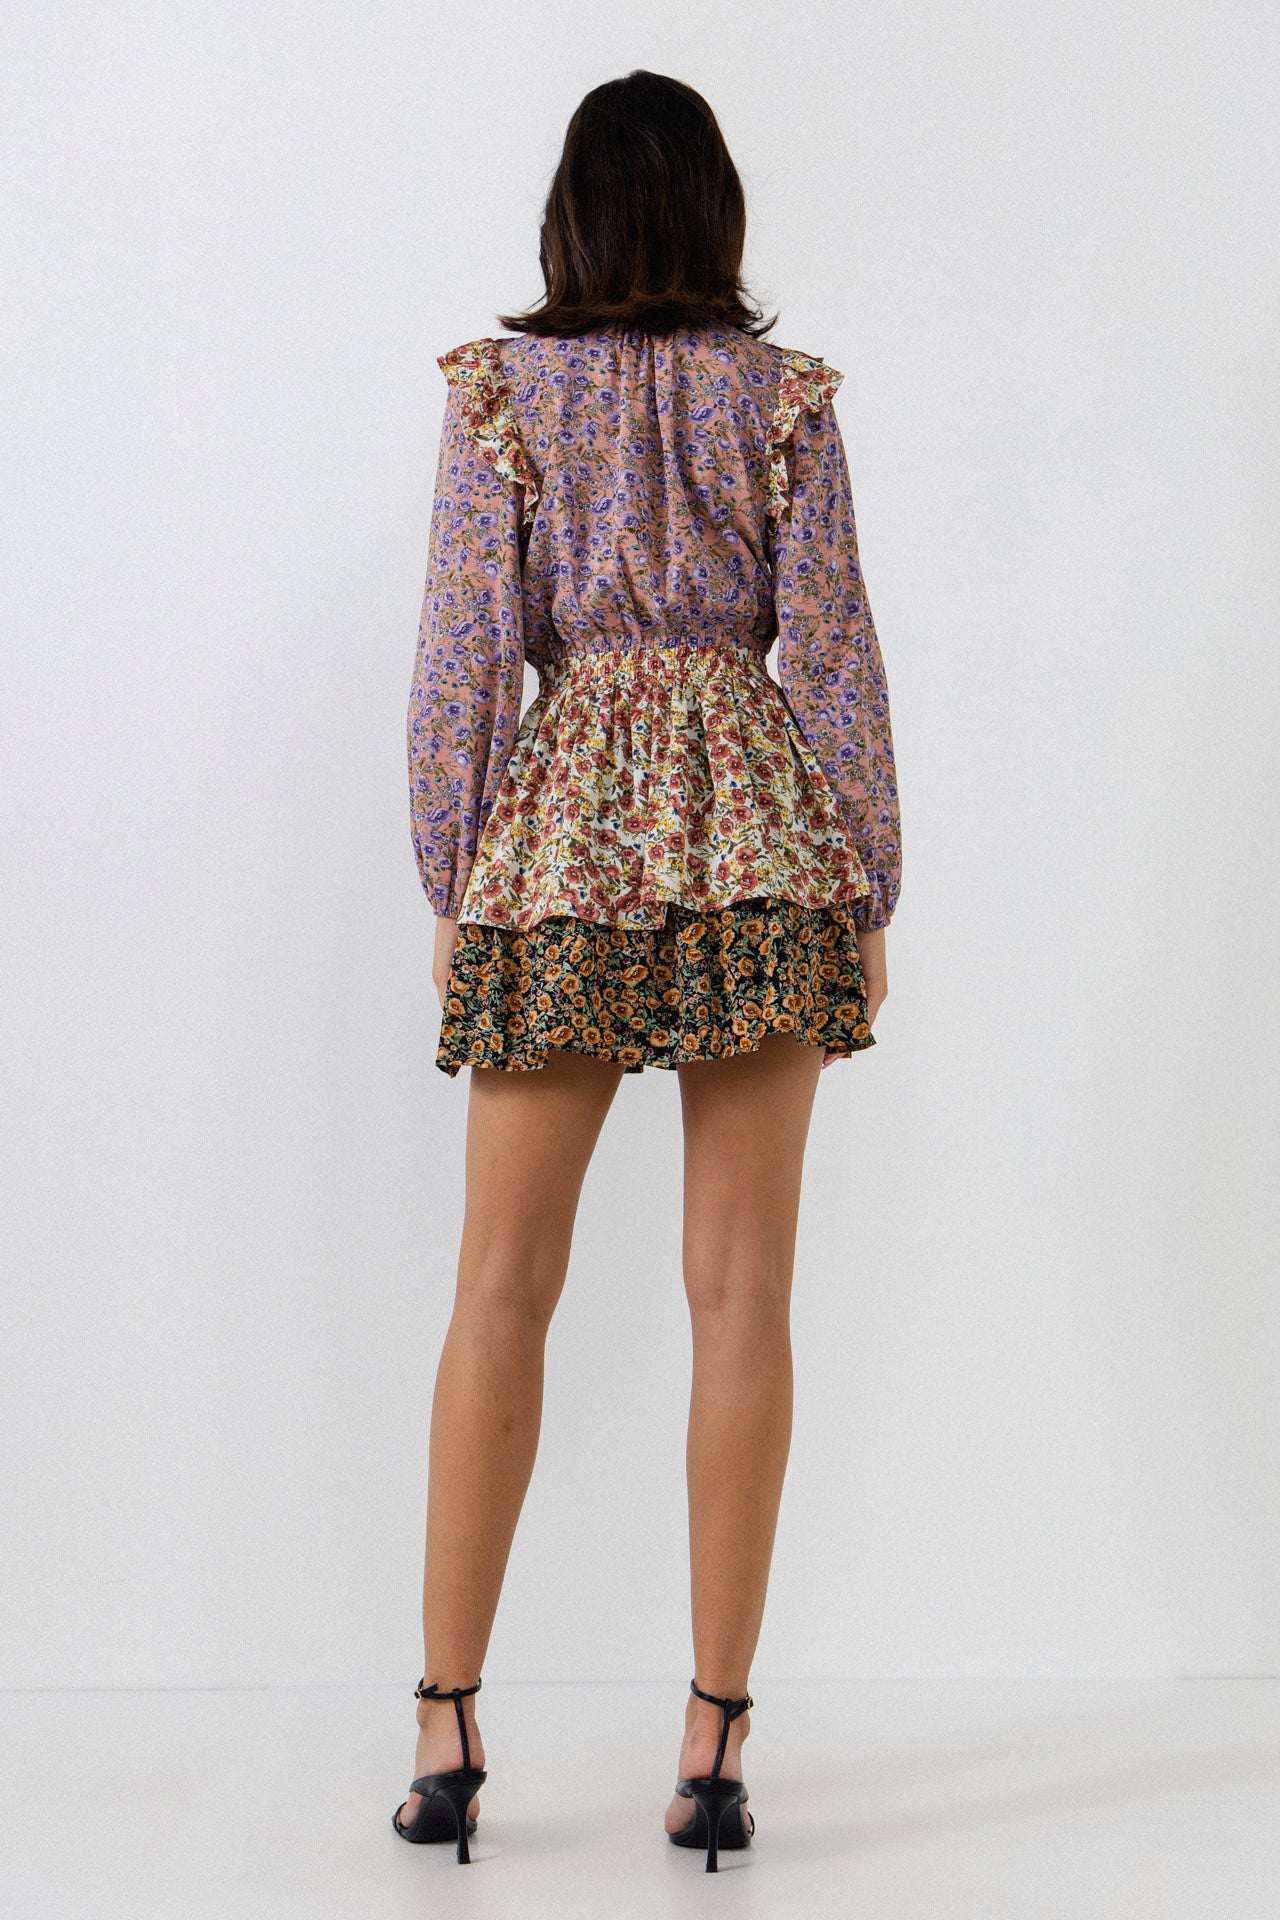 FREE THE ROSES - Floral Multi Color Mini Dress - DRESSES available at Objectrare